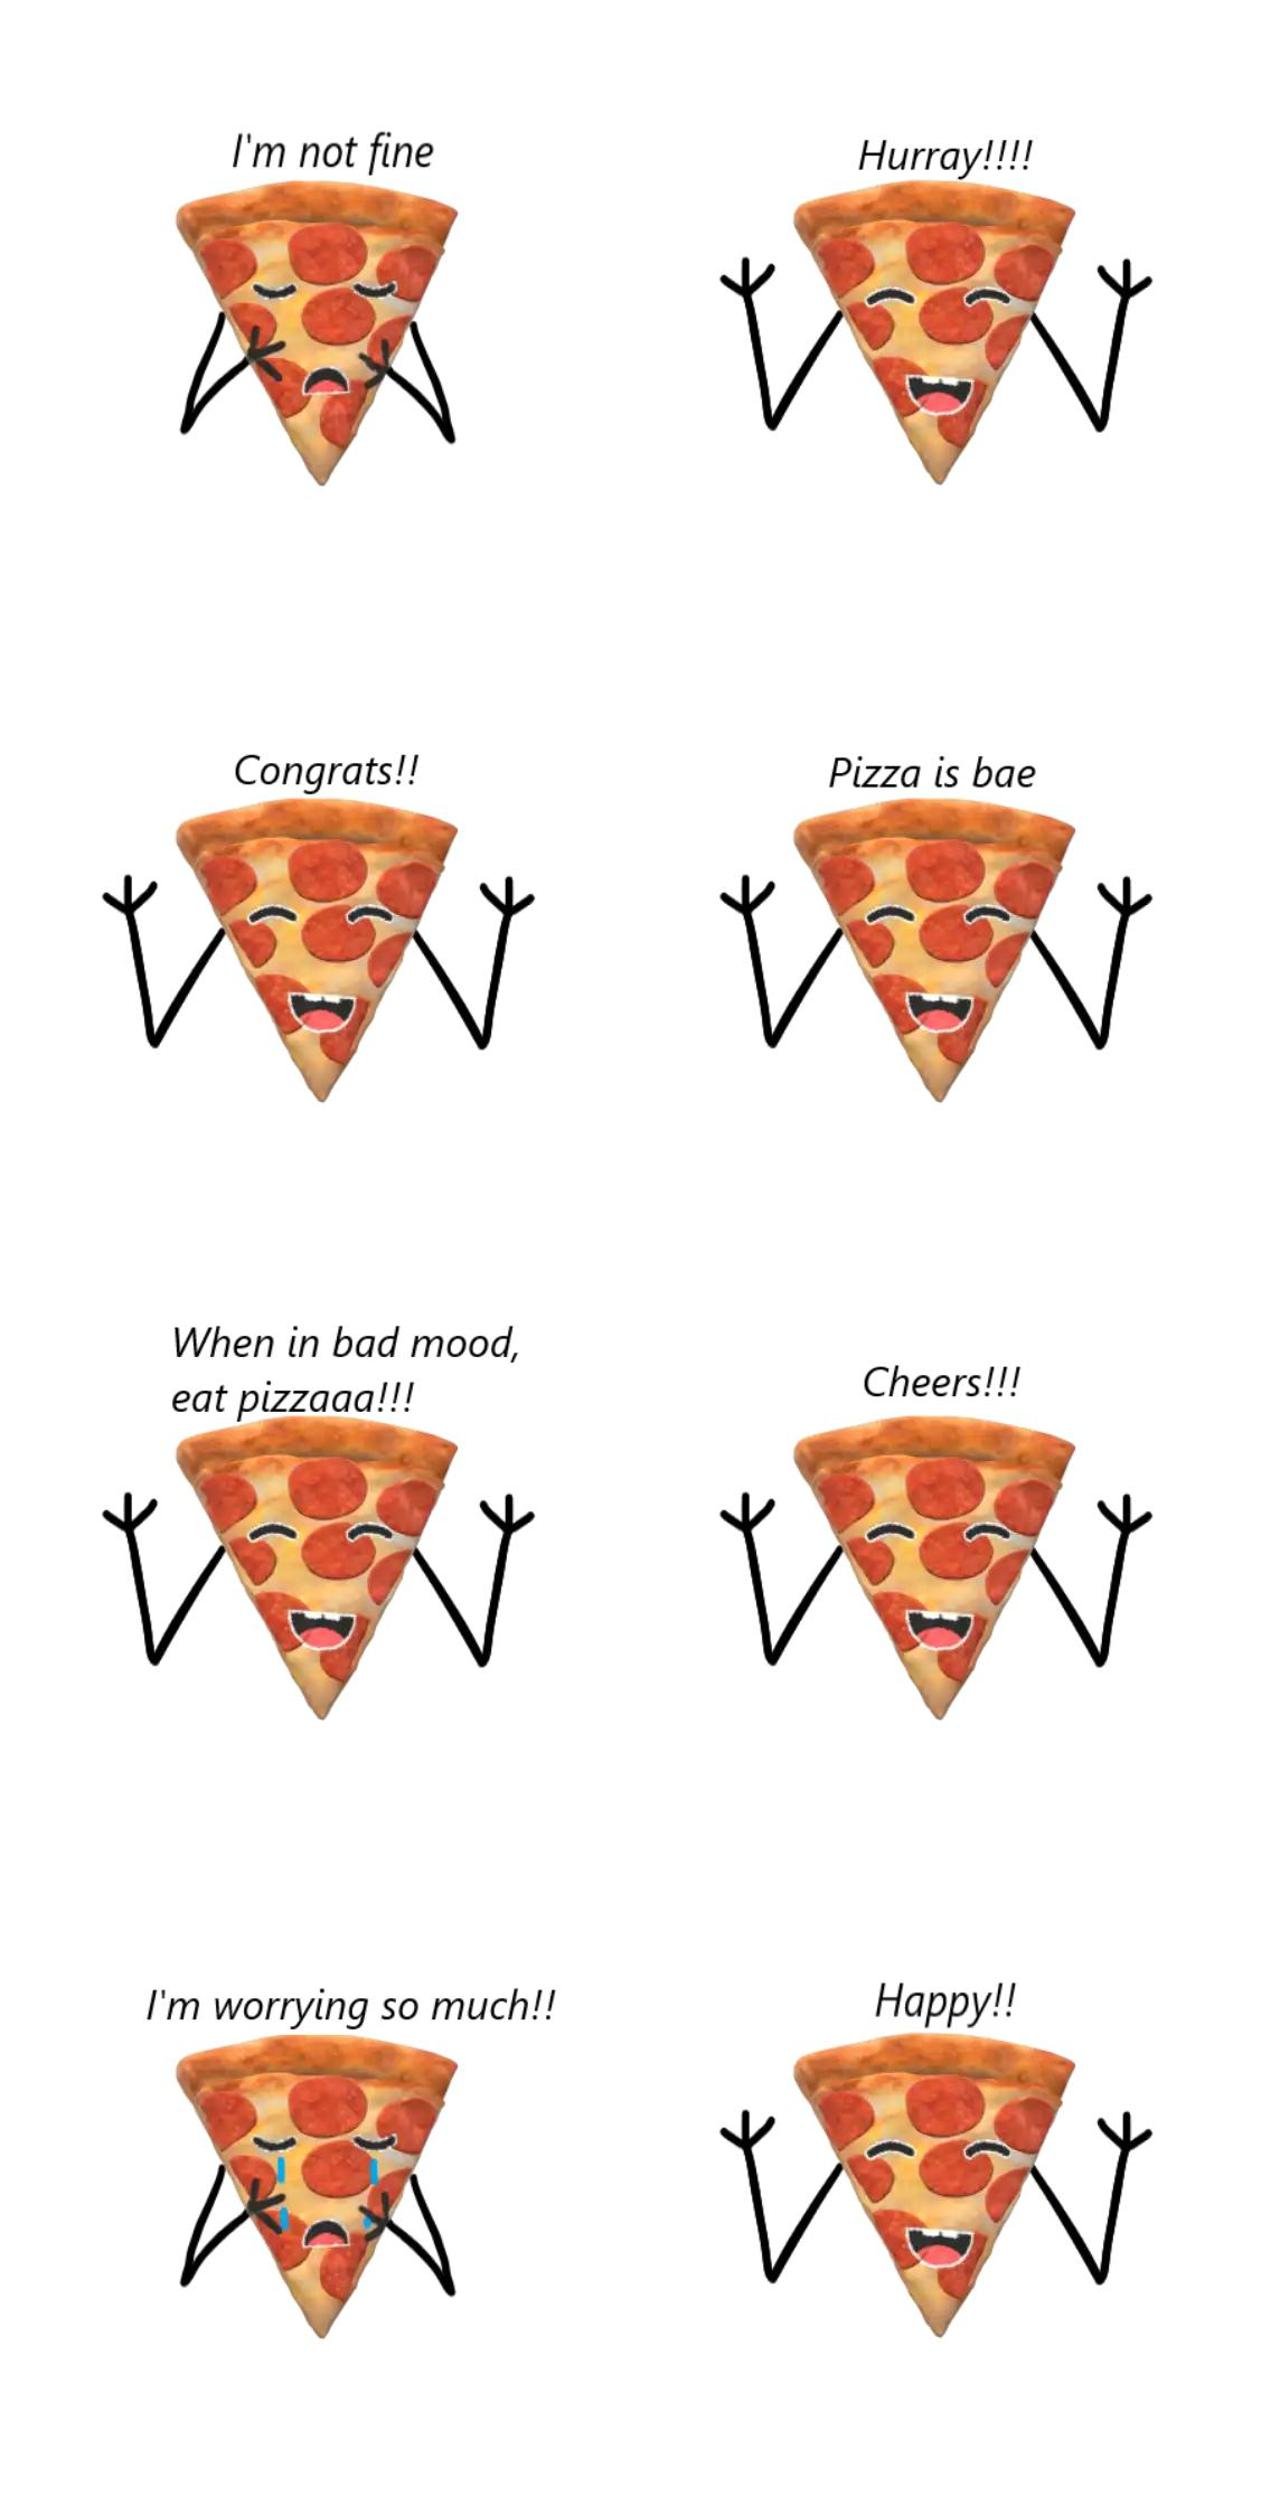 Pizza Animation/Cartoon,Food/Drink sticker pack for Whatsapp, Telegram, Signal, and others chatting and message apps